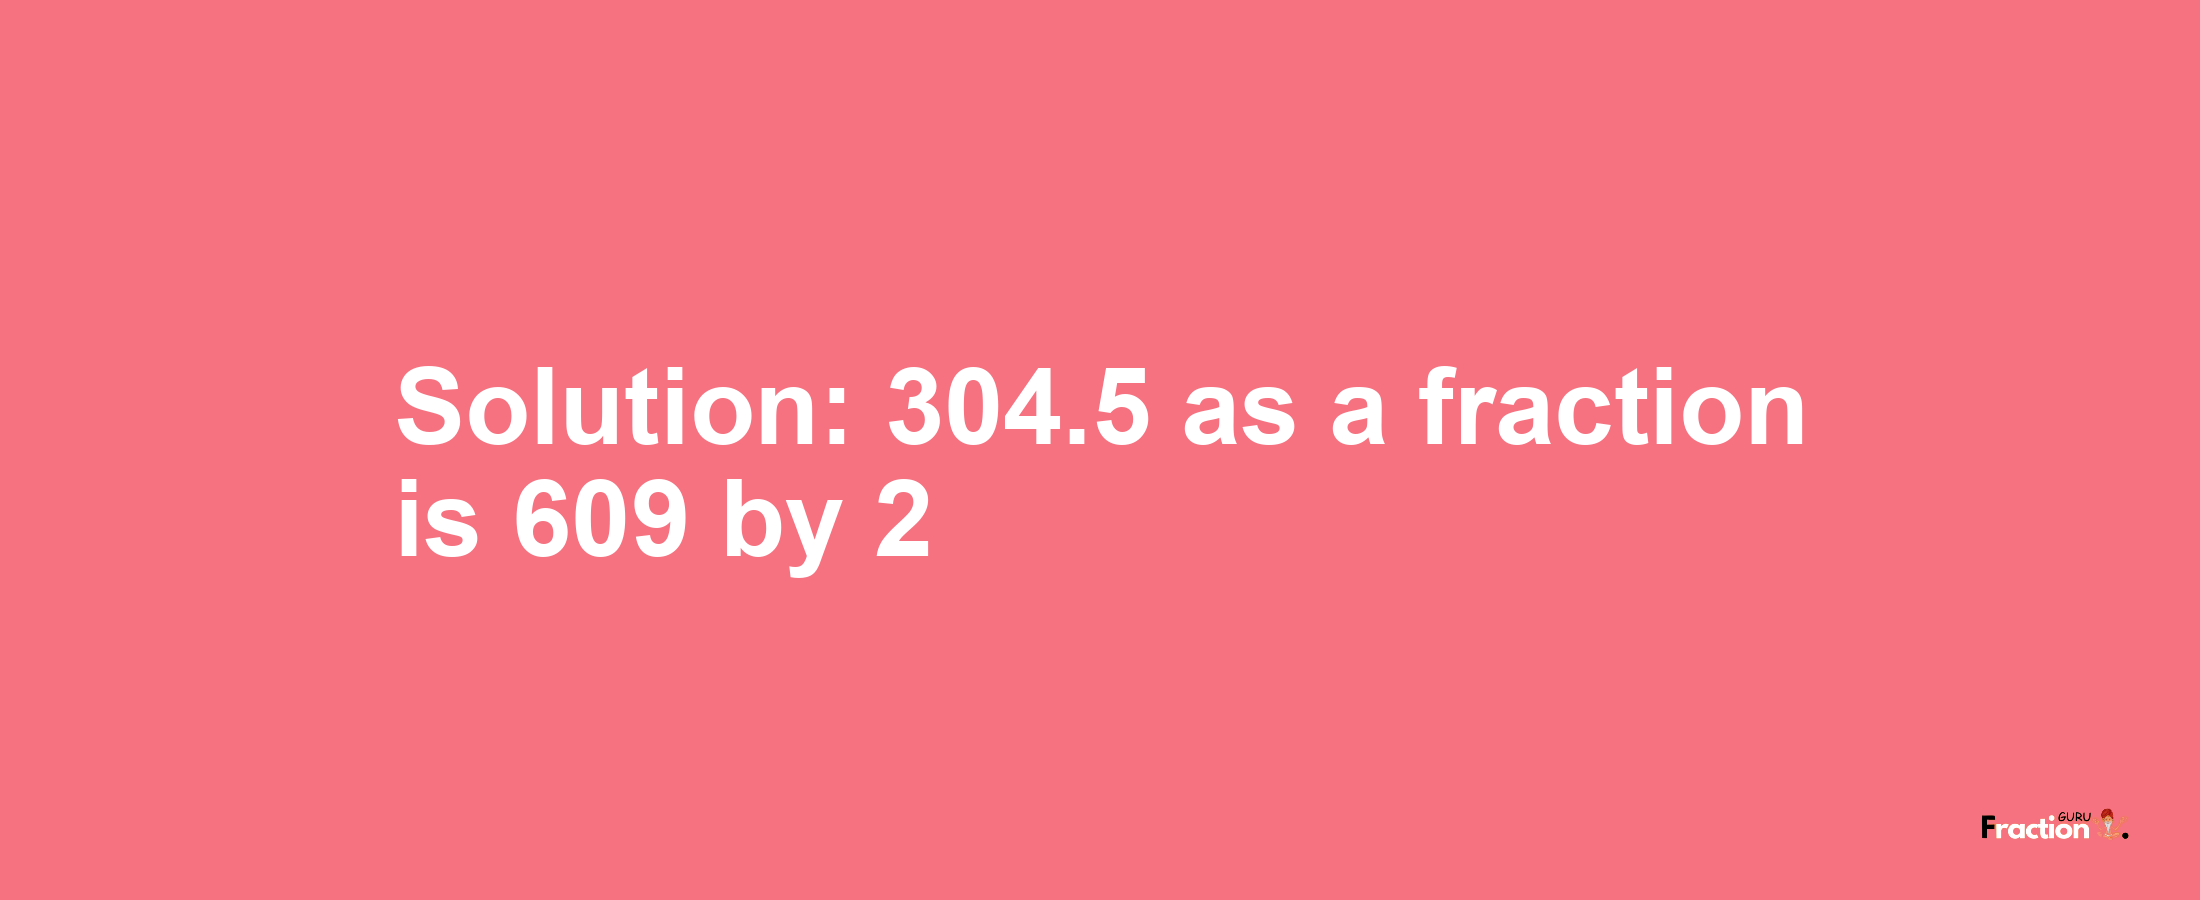 Solution:304.5 as a fraction is 609/2